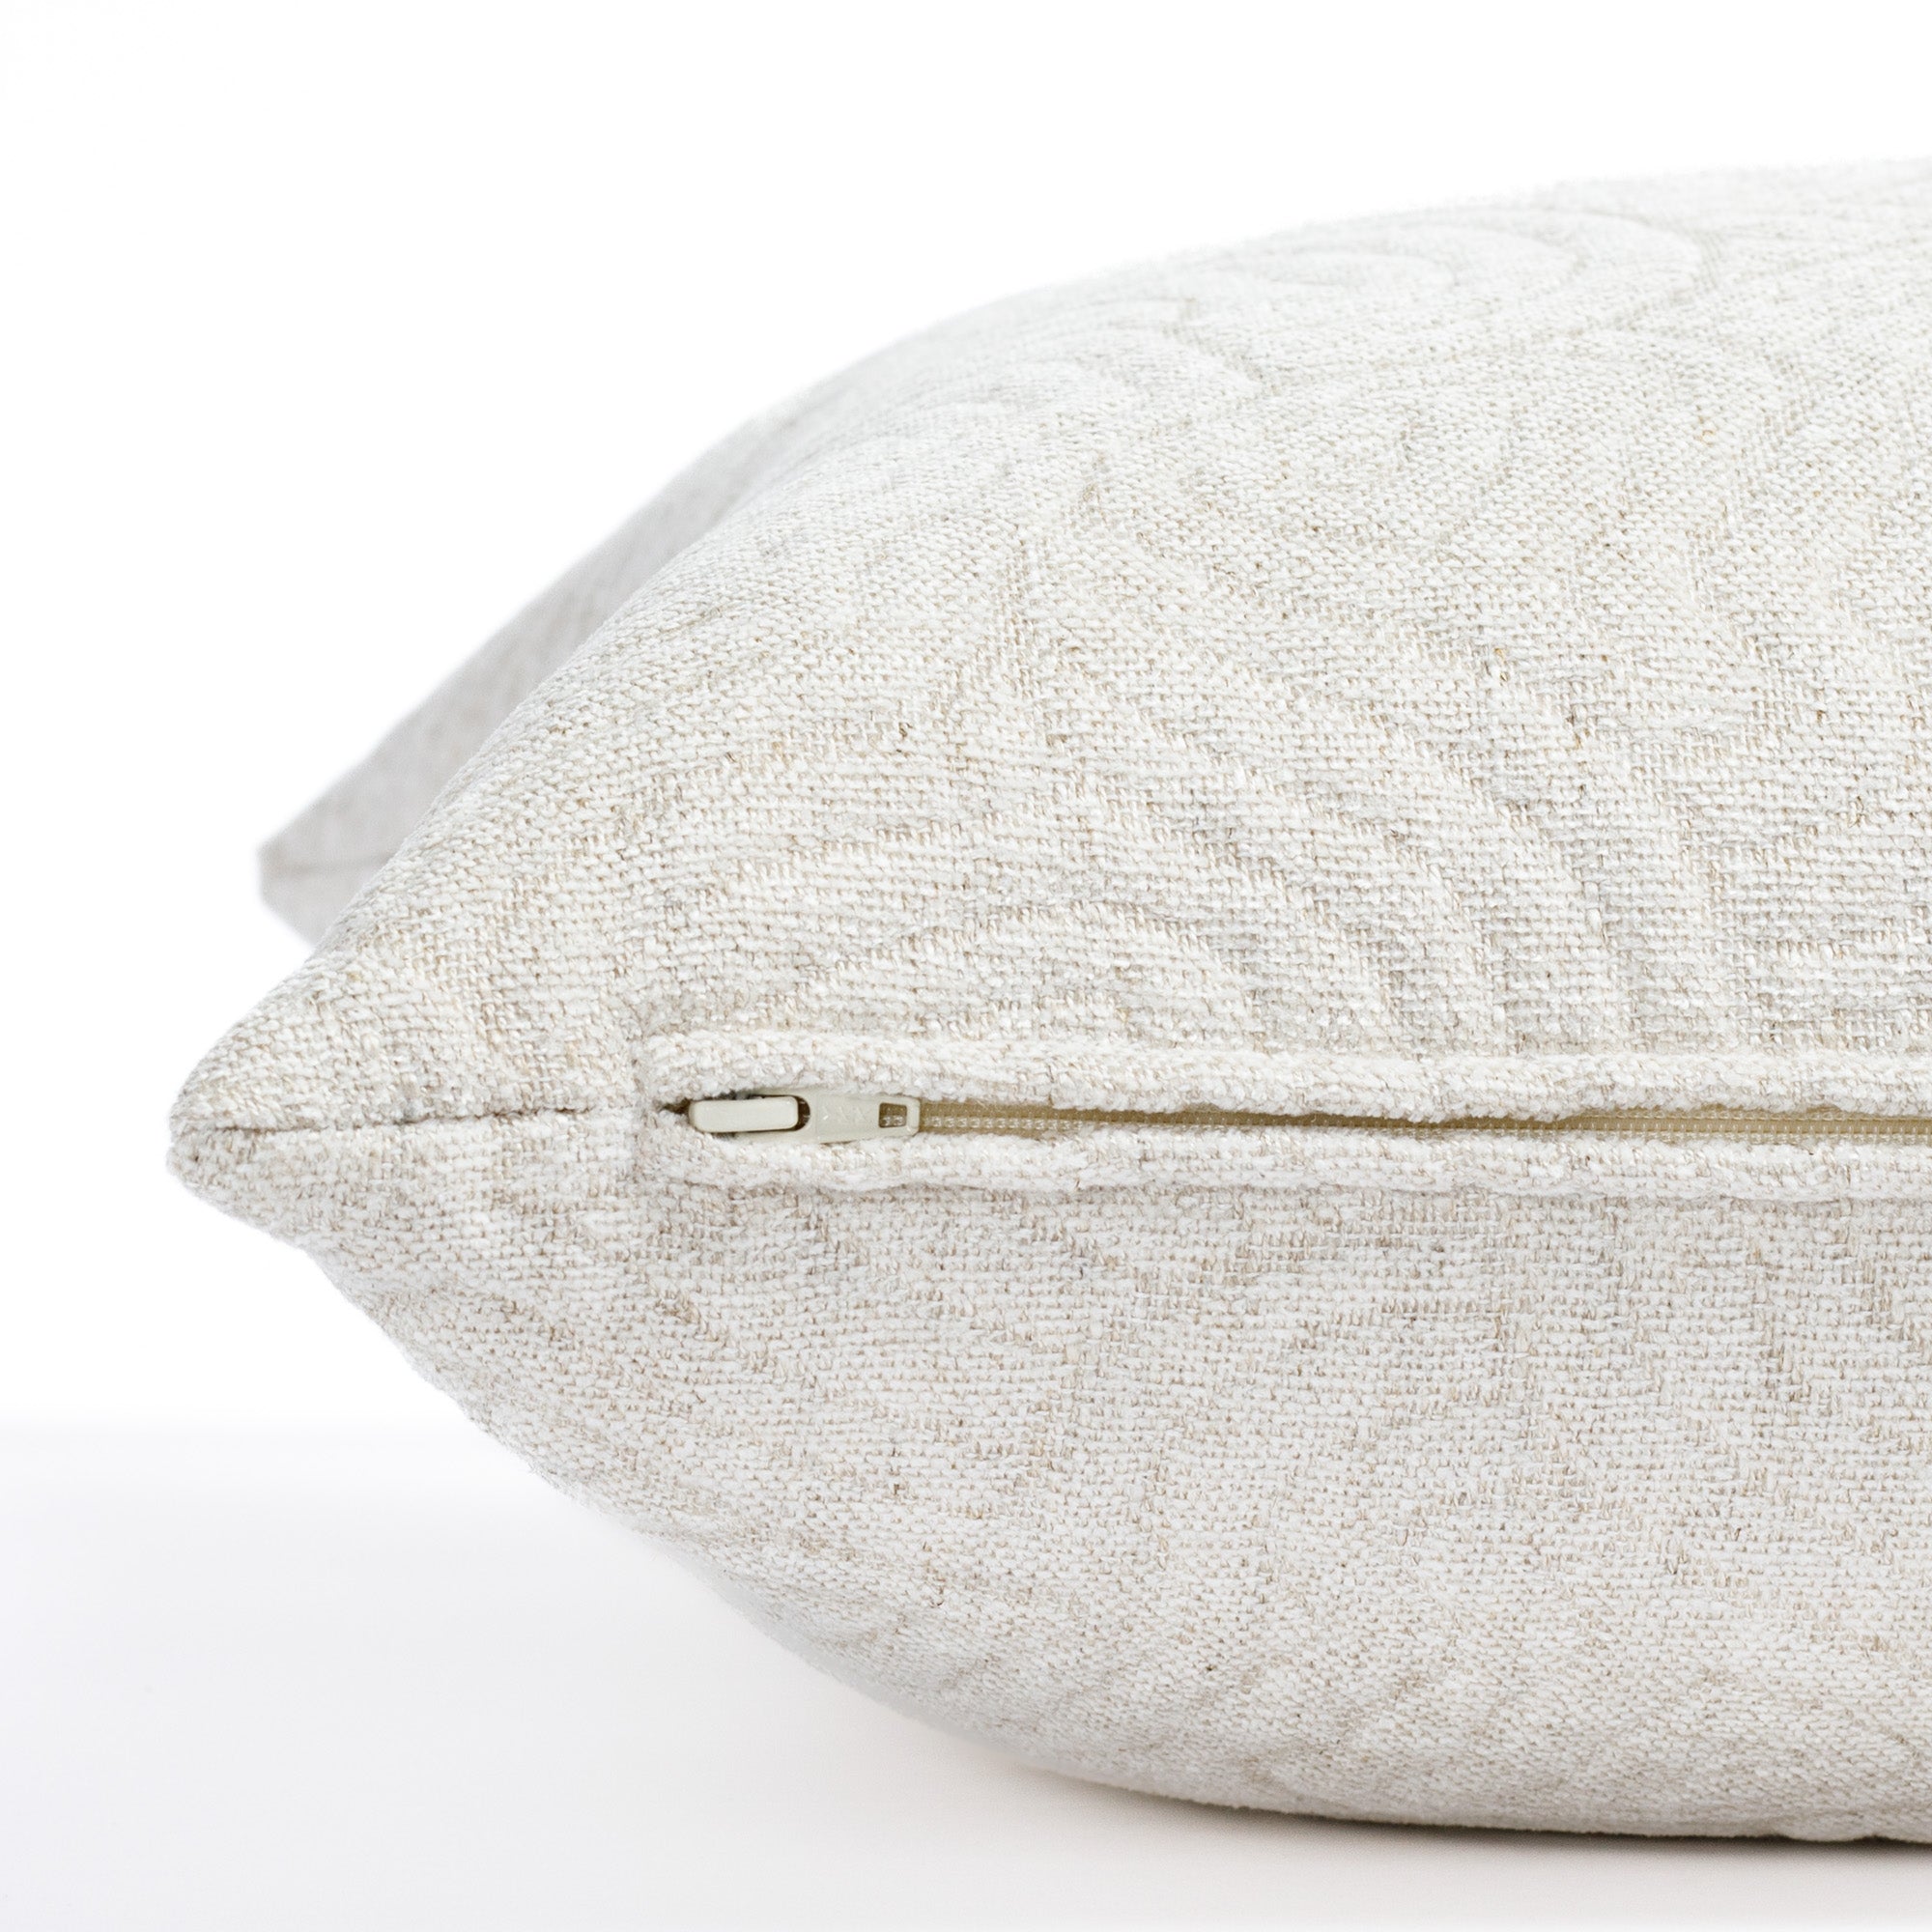 a quilted white abstract patterned pillow : close up zipper view